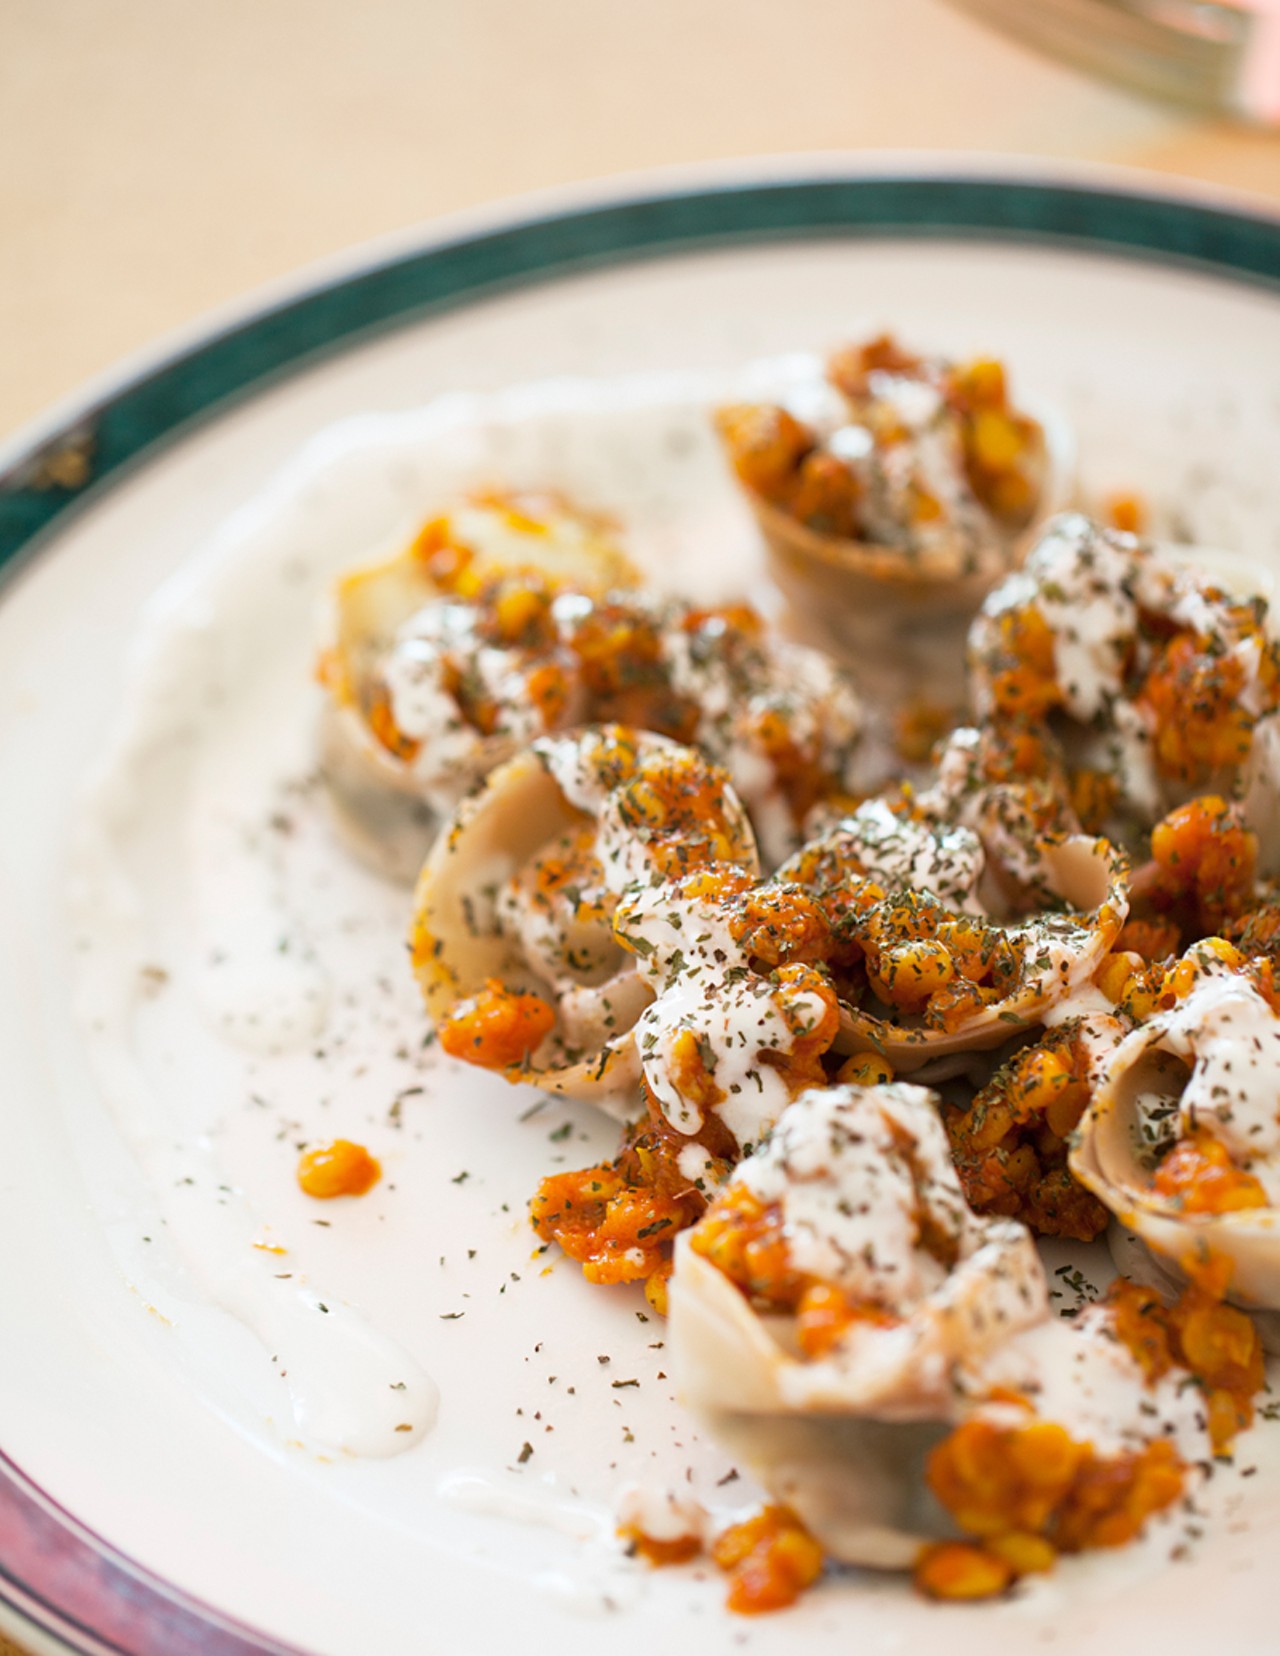 Muntoo is steamed dumplings stuffed with ground beef and onions, then topped with lentils, beef, garlic yogurt and mint.